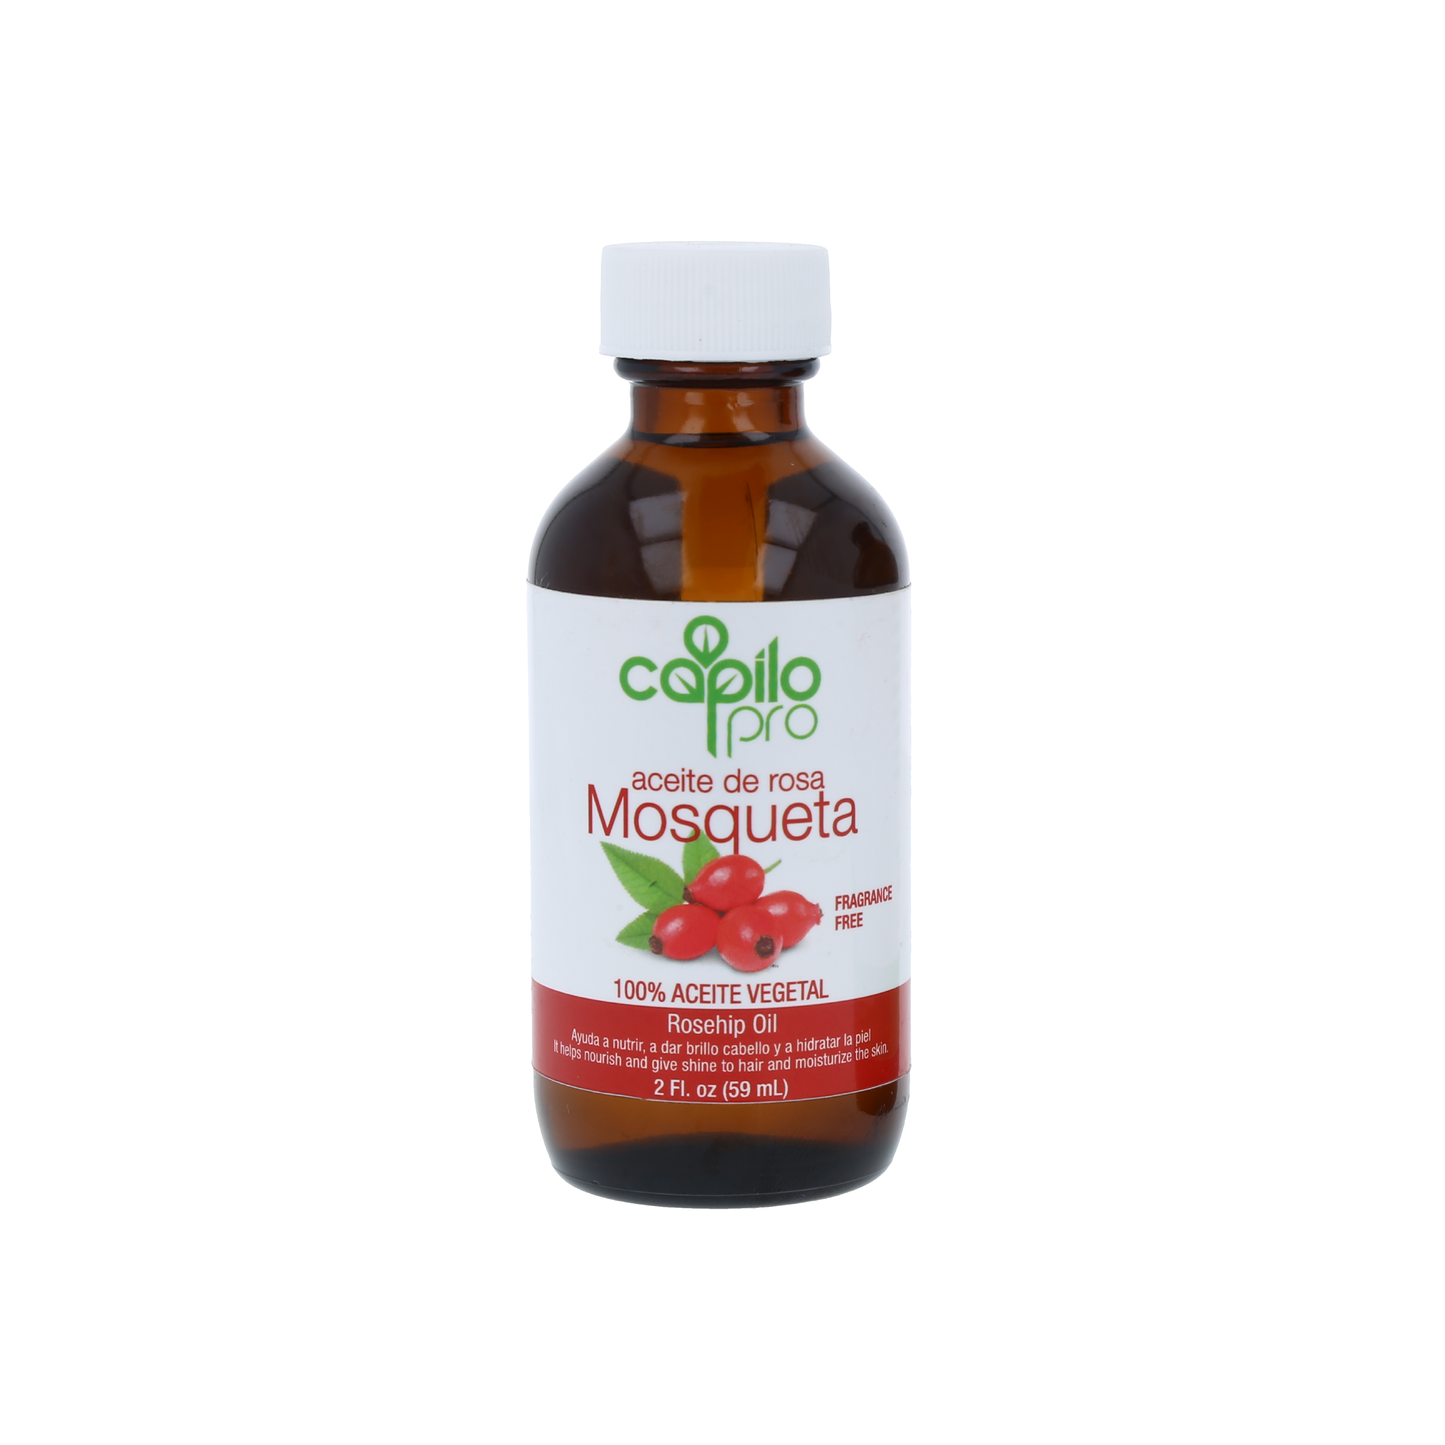 Capilo Pro Rosehip Oil 2 oz. | Repair Hair and Softens the scars | Blend of soybean oil and Rosehip Oil